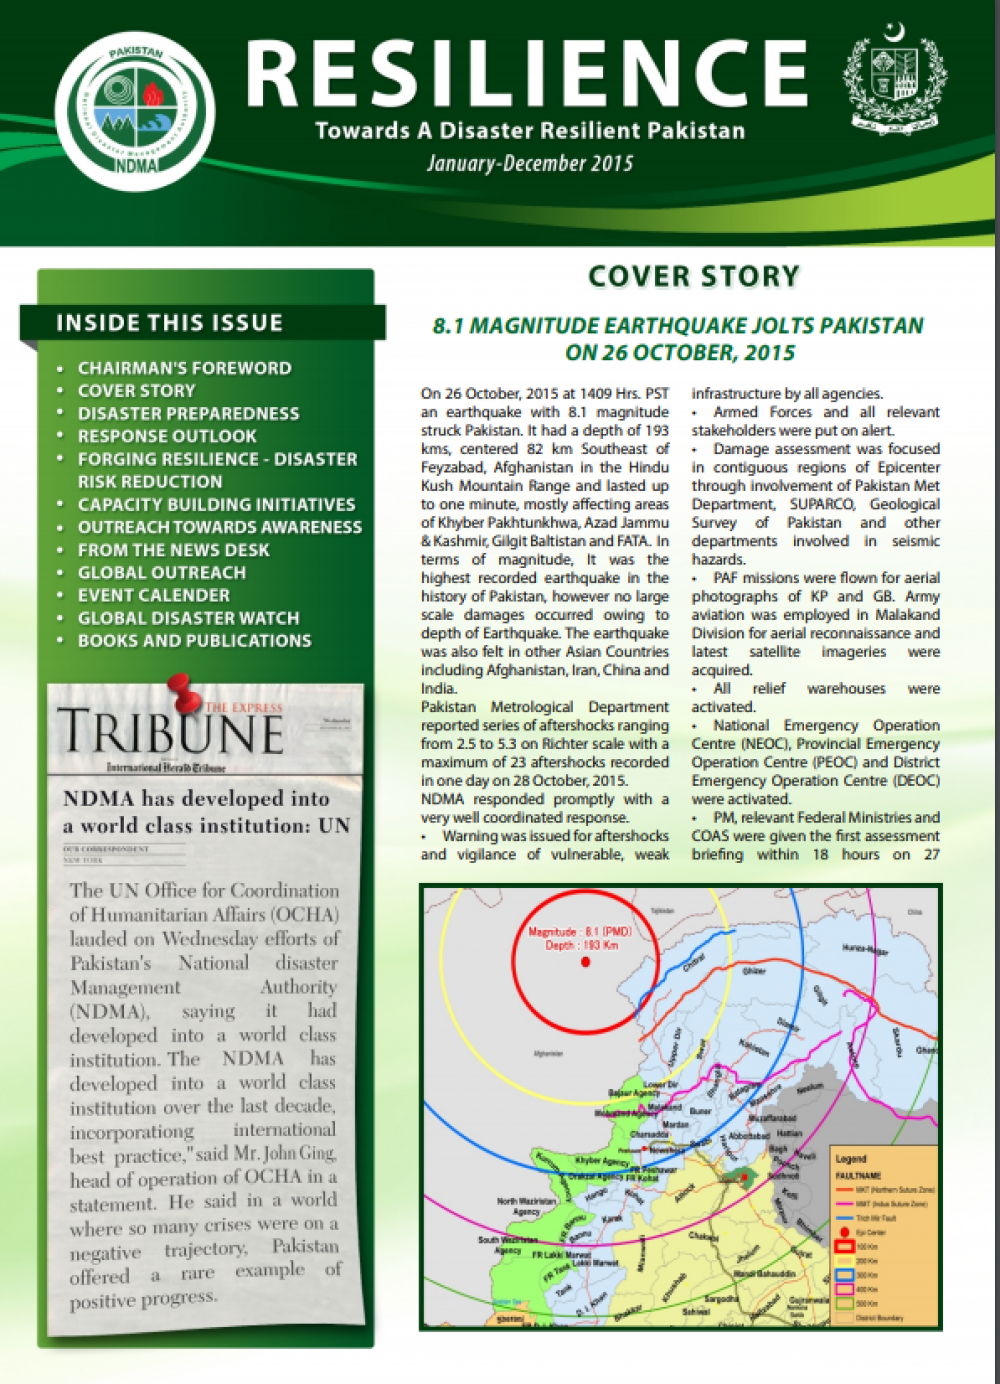 Resilience Toward A Disaster Resilient Pakistan January-December 2015